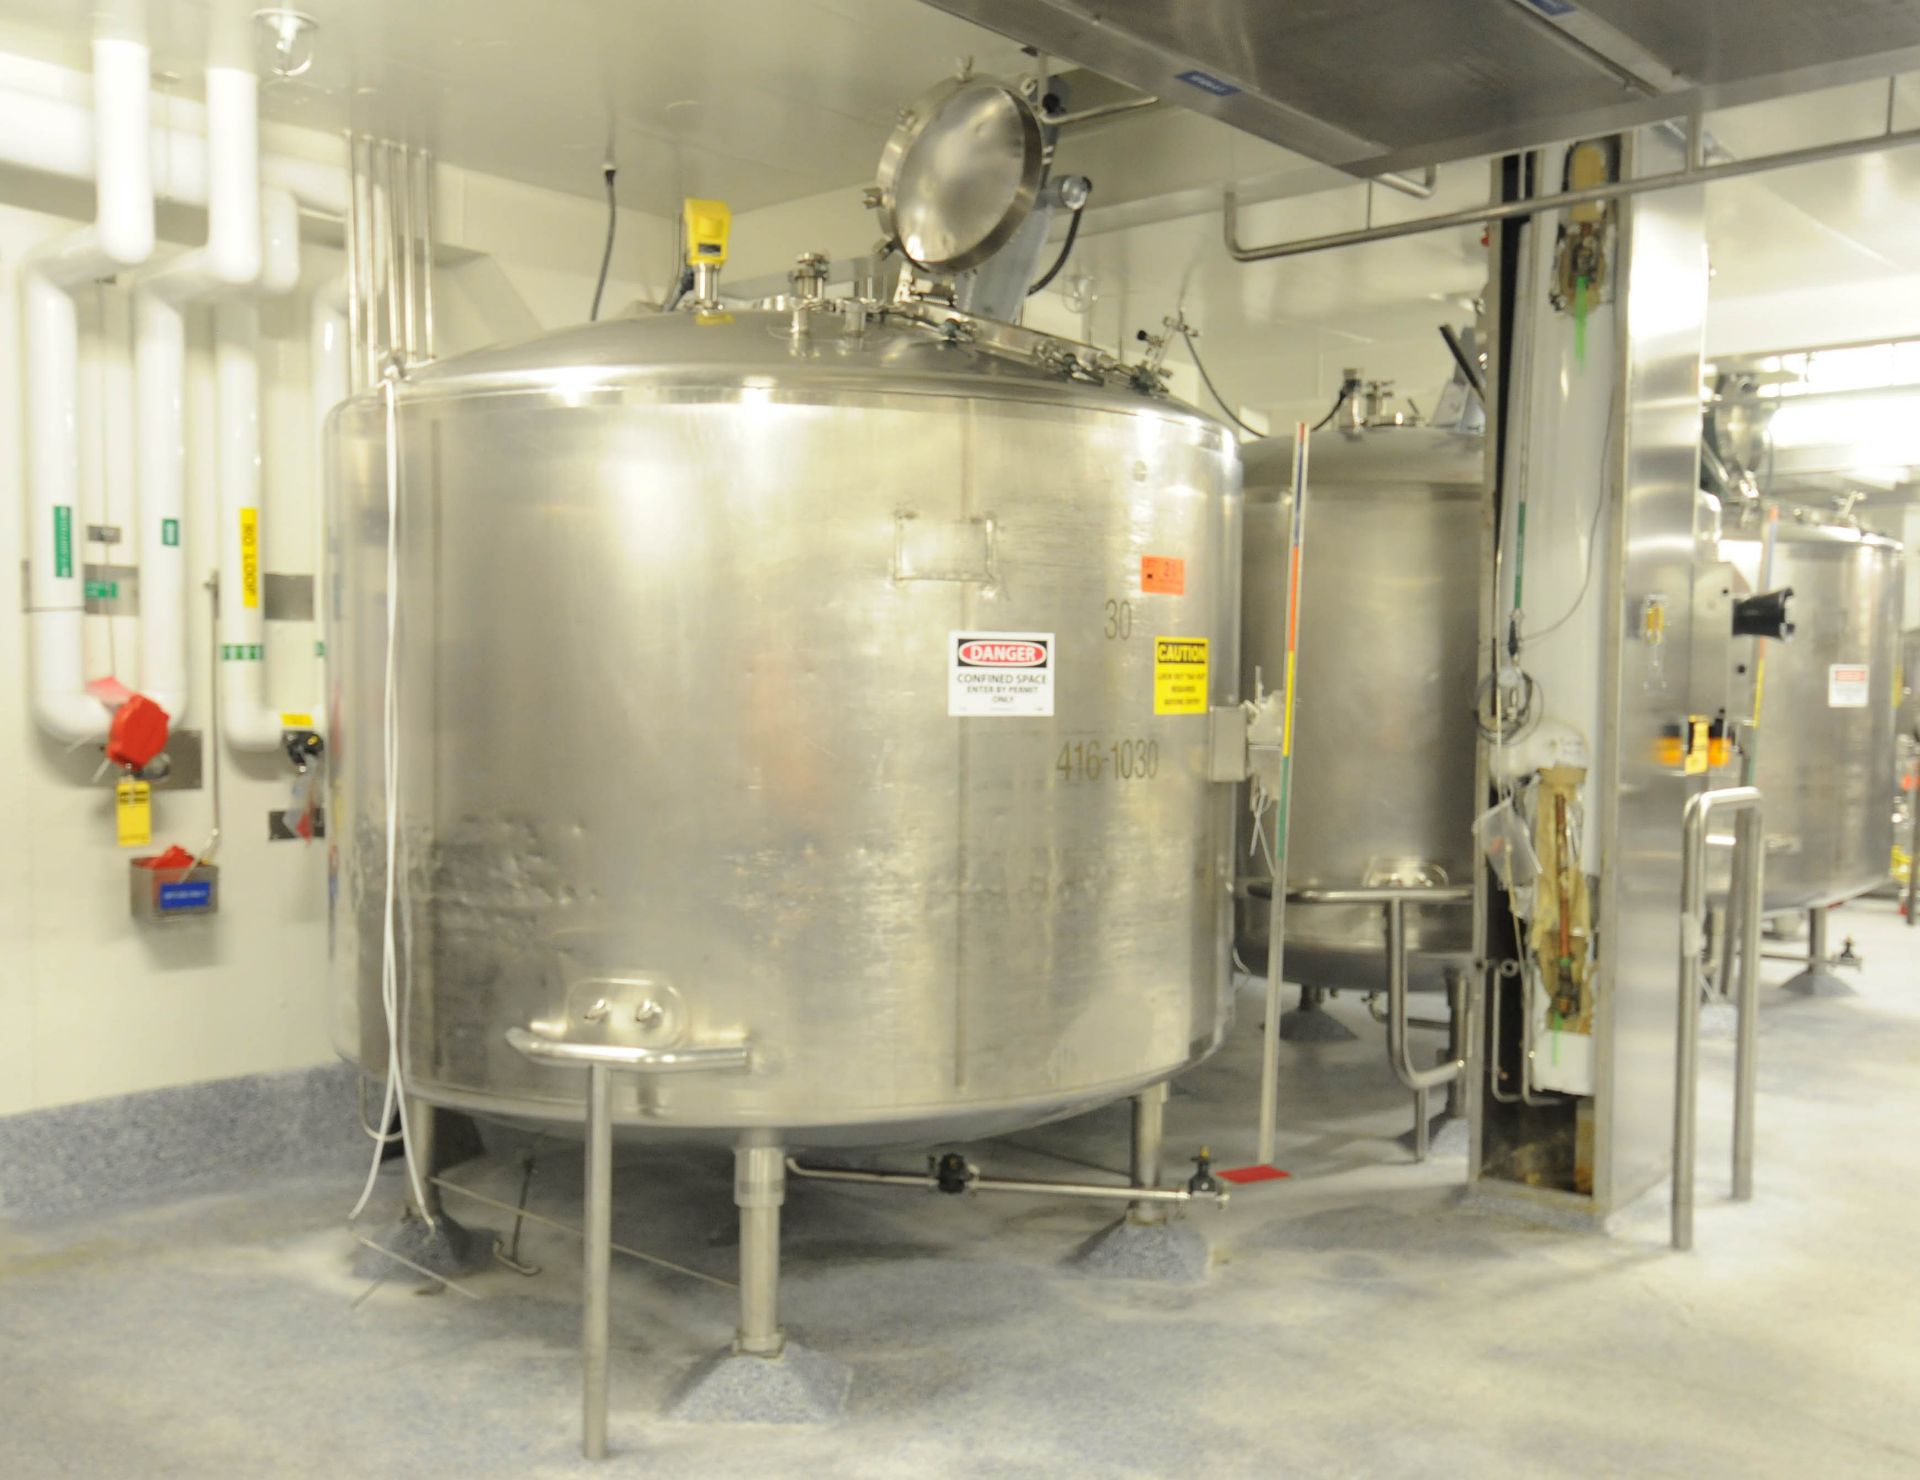 MUELLER T#30 (R&R 4/12/2016) STAINLESS STEEL JACKETED MIXING TANK WITH 6000 LITER CAPACITY, 25 PSIG